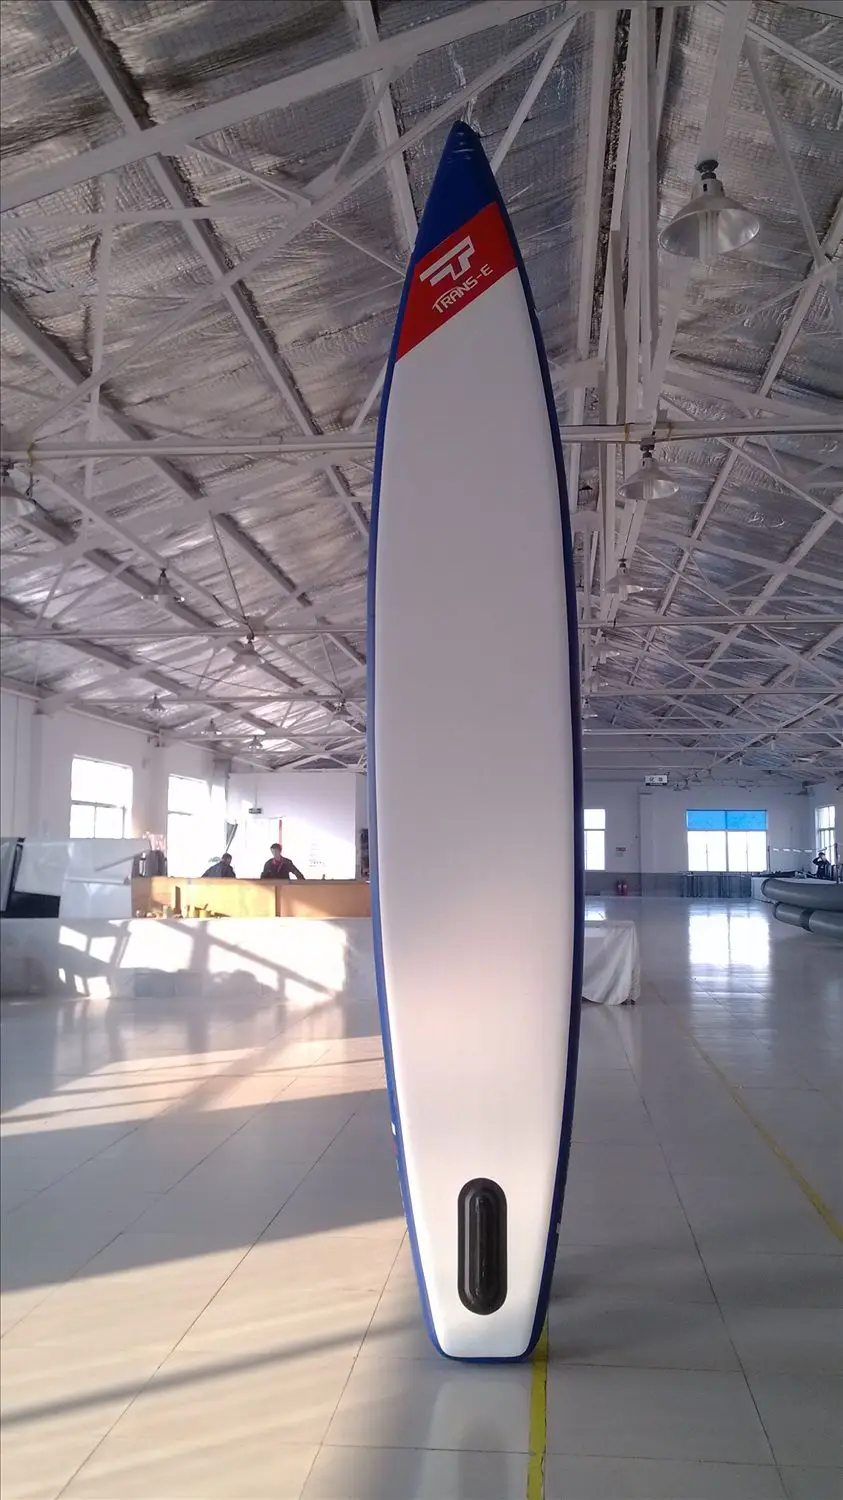 
Inflatable Sup Paddle Surfboard Paddleboards For Sale 